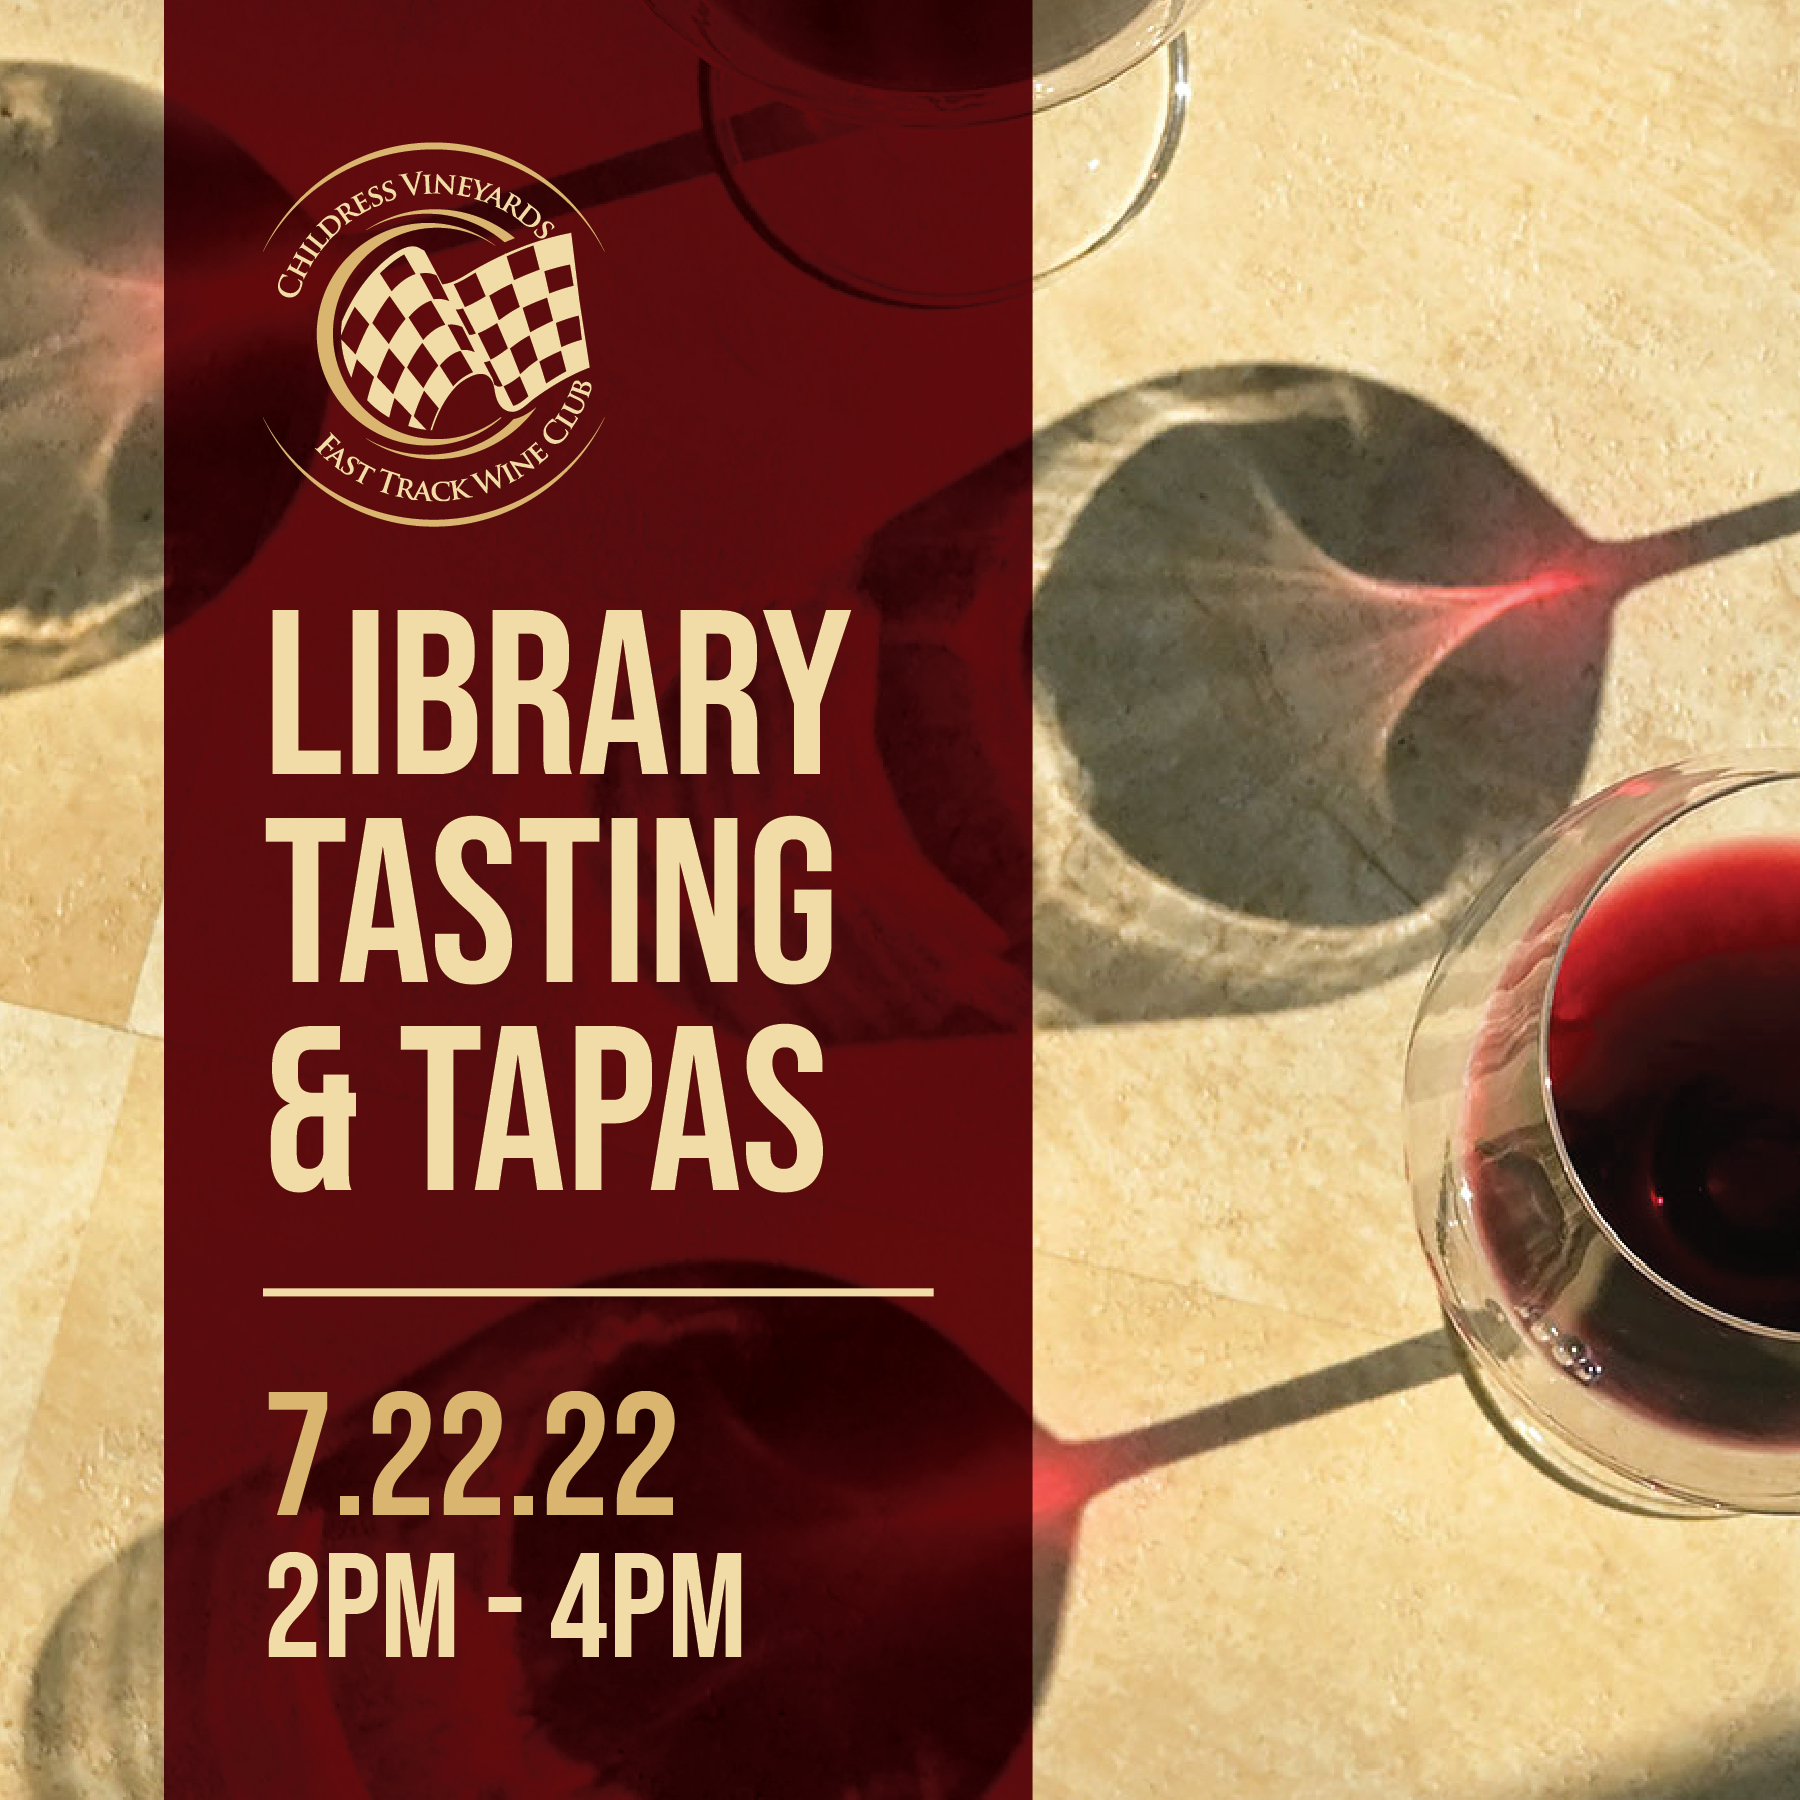 Childress Vineyards Library Tasting and Tapas